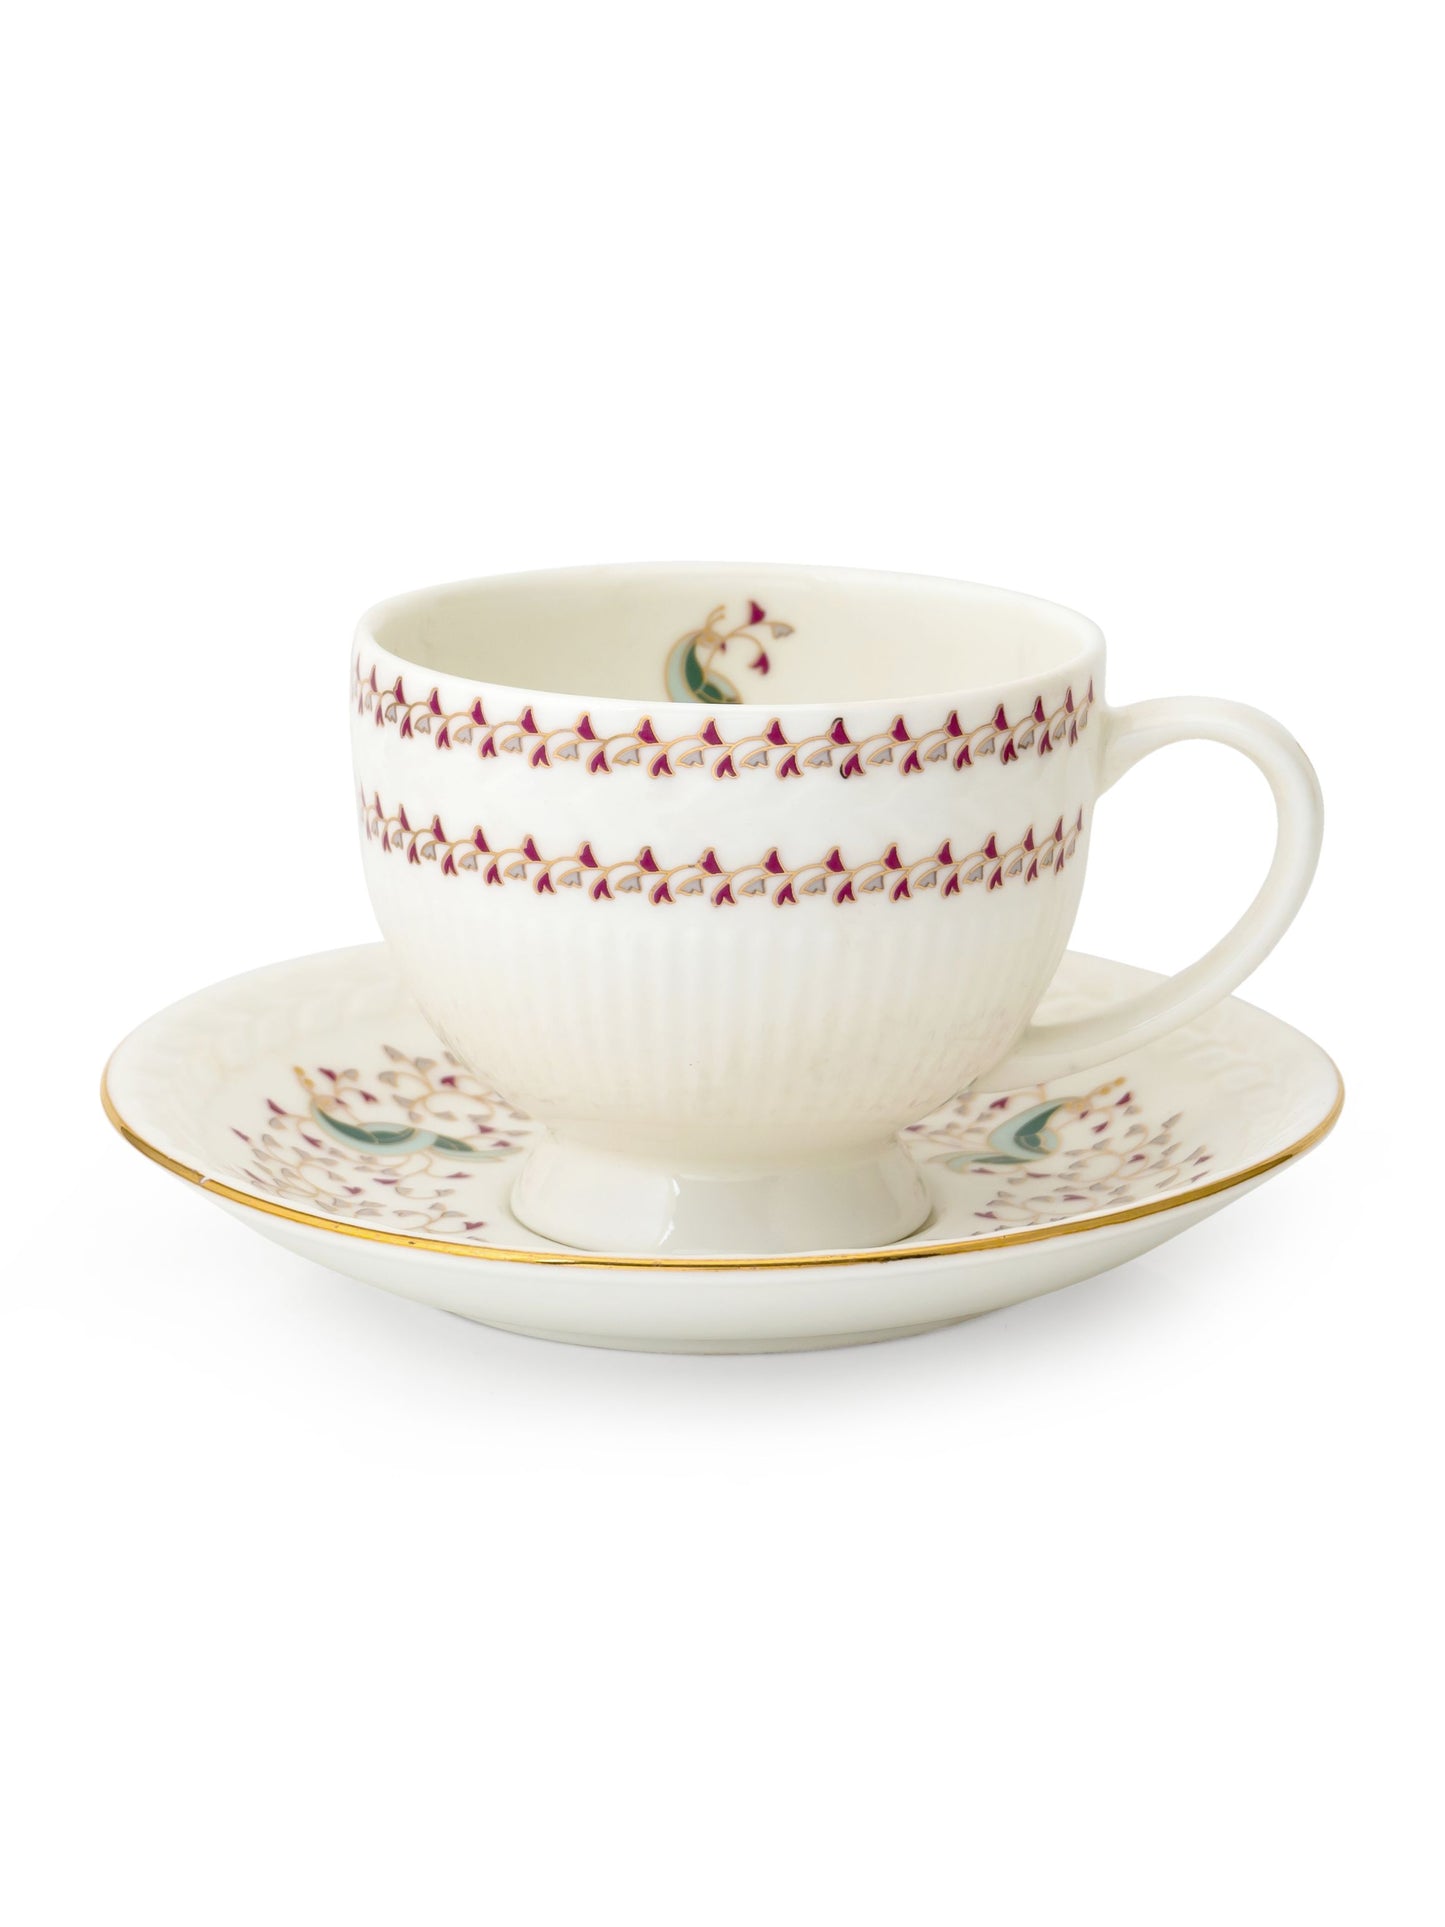 Snow Impression Cup & Saucer, 170 ml, Set of 12 (6 Cups + 6 Saucers) (1403)